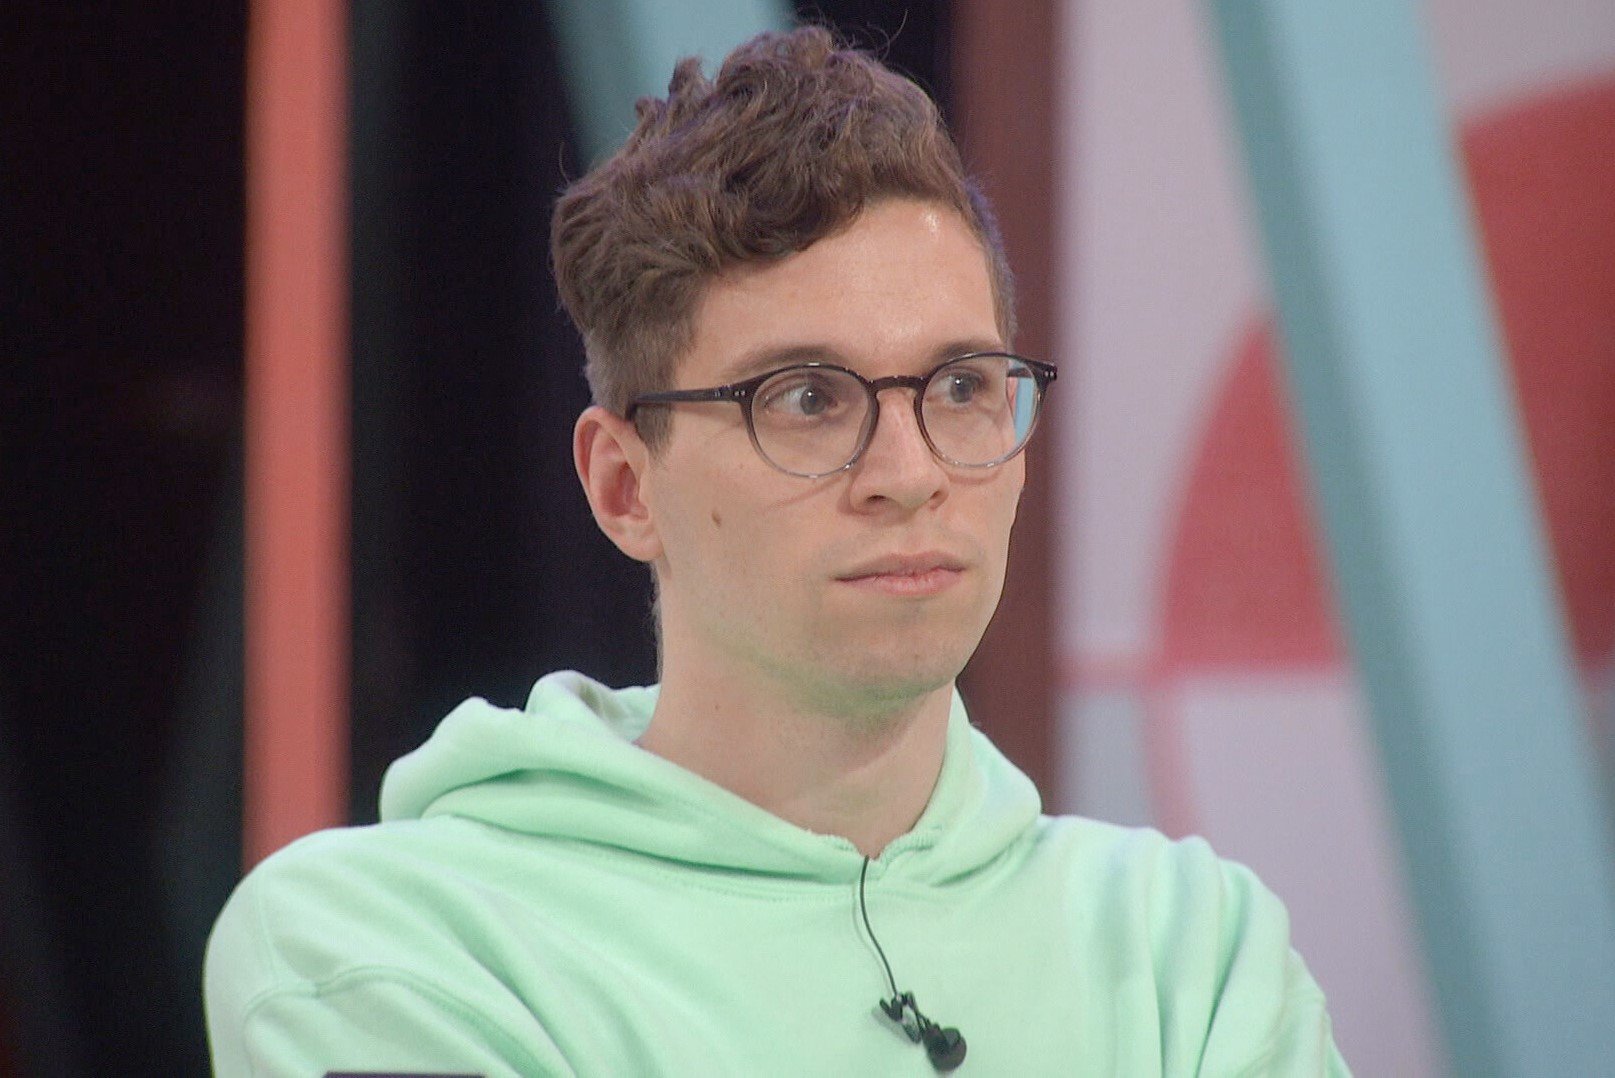 Michael Bruner, who won the Power of Veto during 'Big Brother 24' week eight, wears a mint green hoodie and glasses.